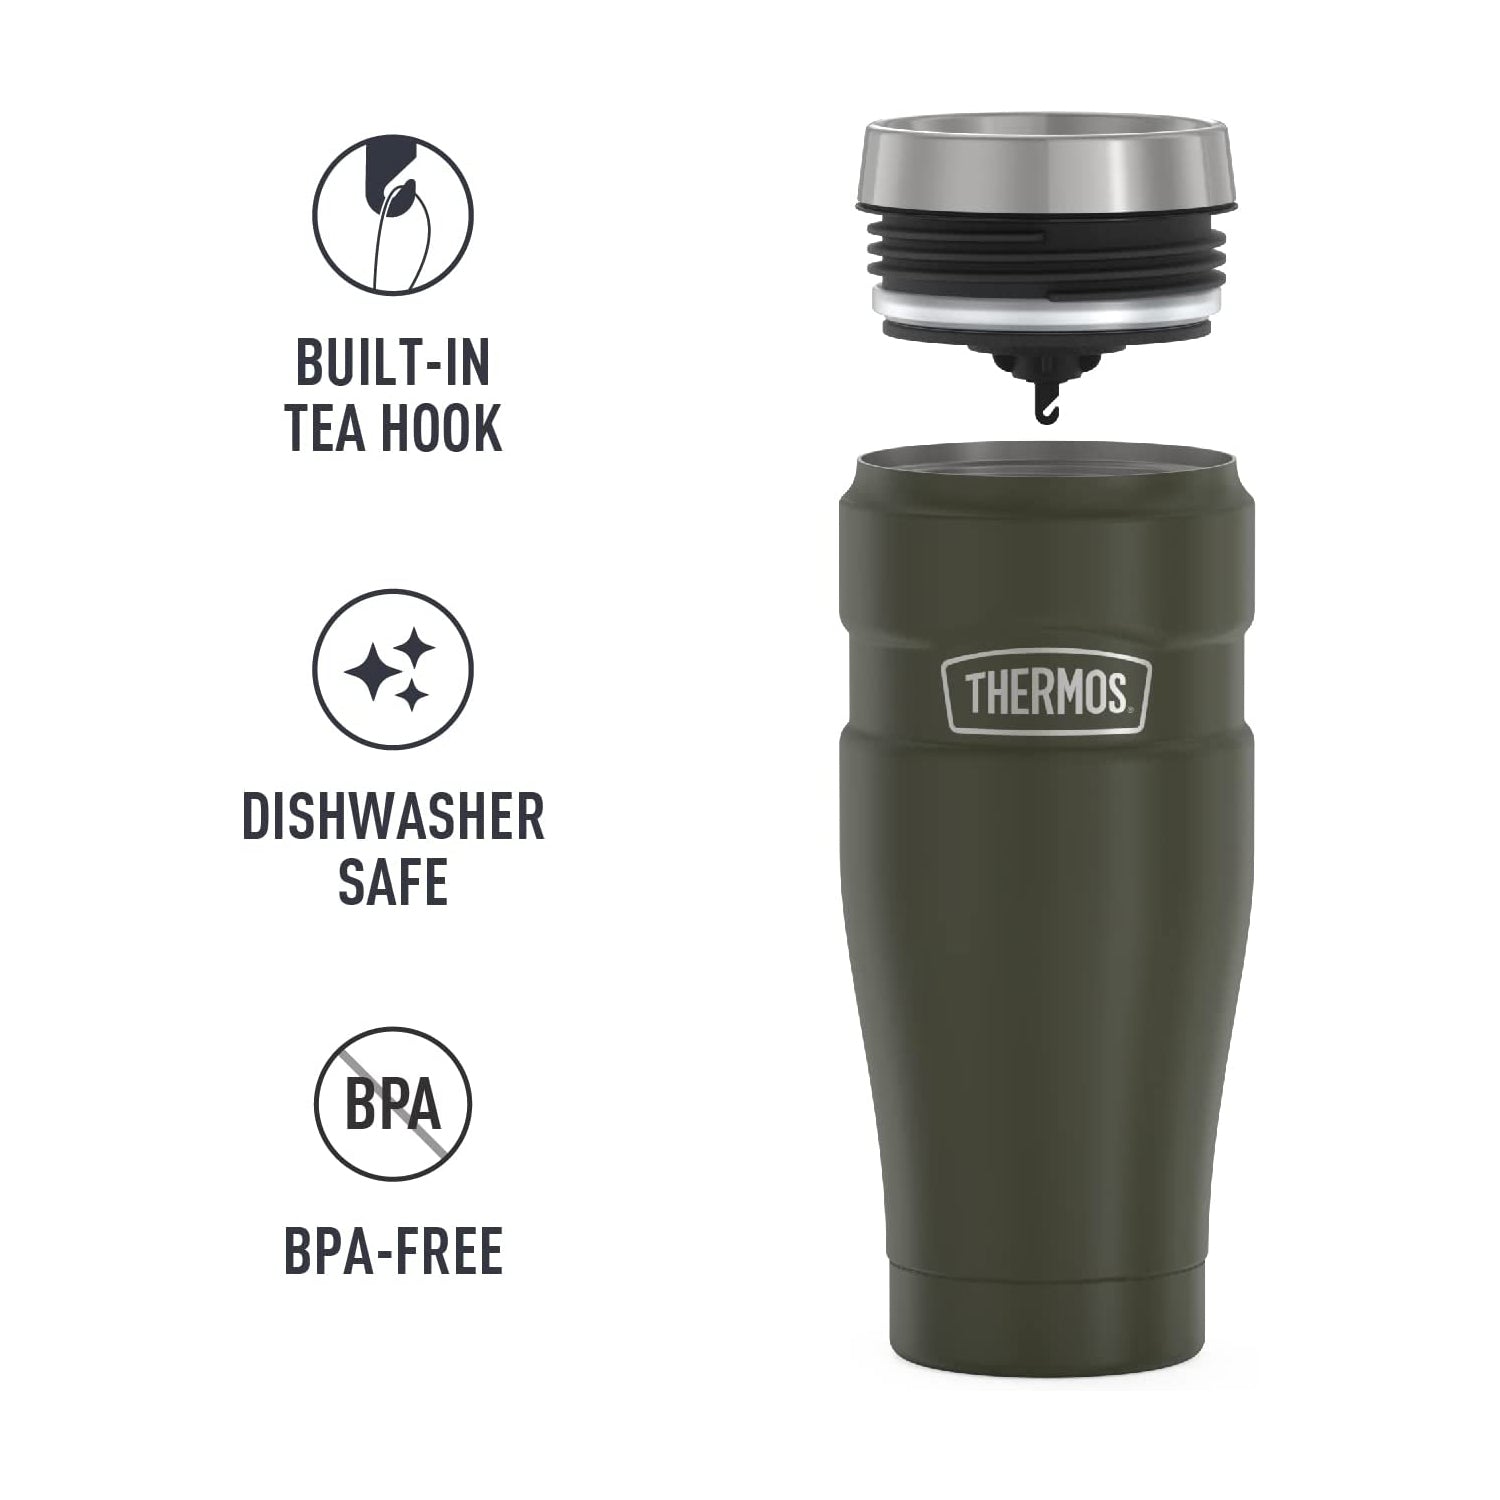 Thermos Staineless Steel King 16 Ounce Travel Tumbler - Army Green